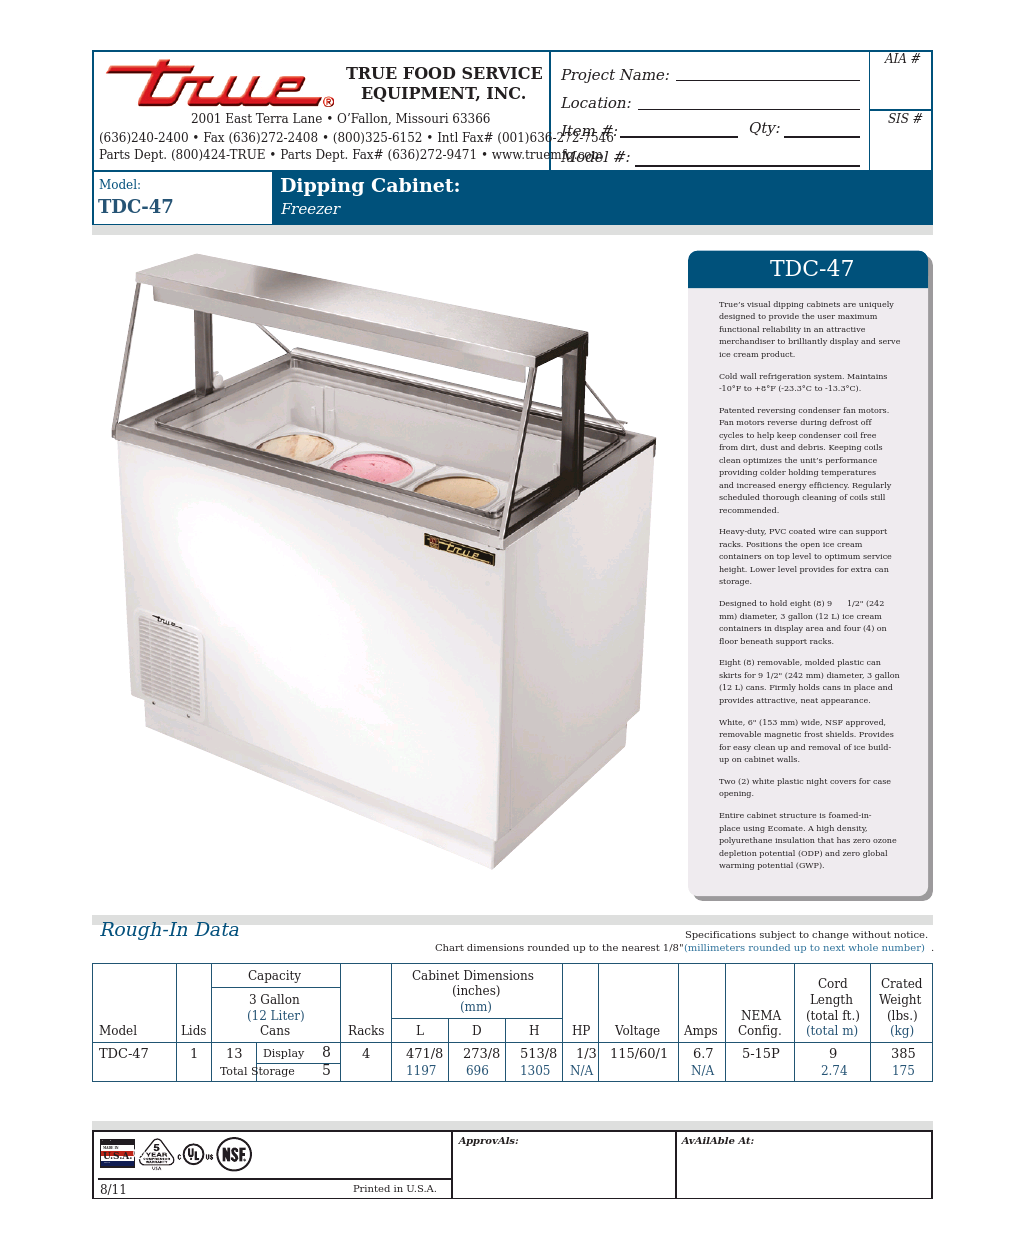 Dipping Cabinet: Freezer TDC-47